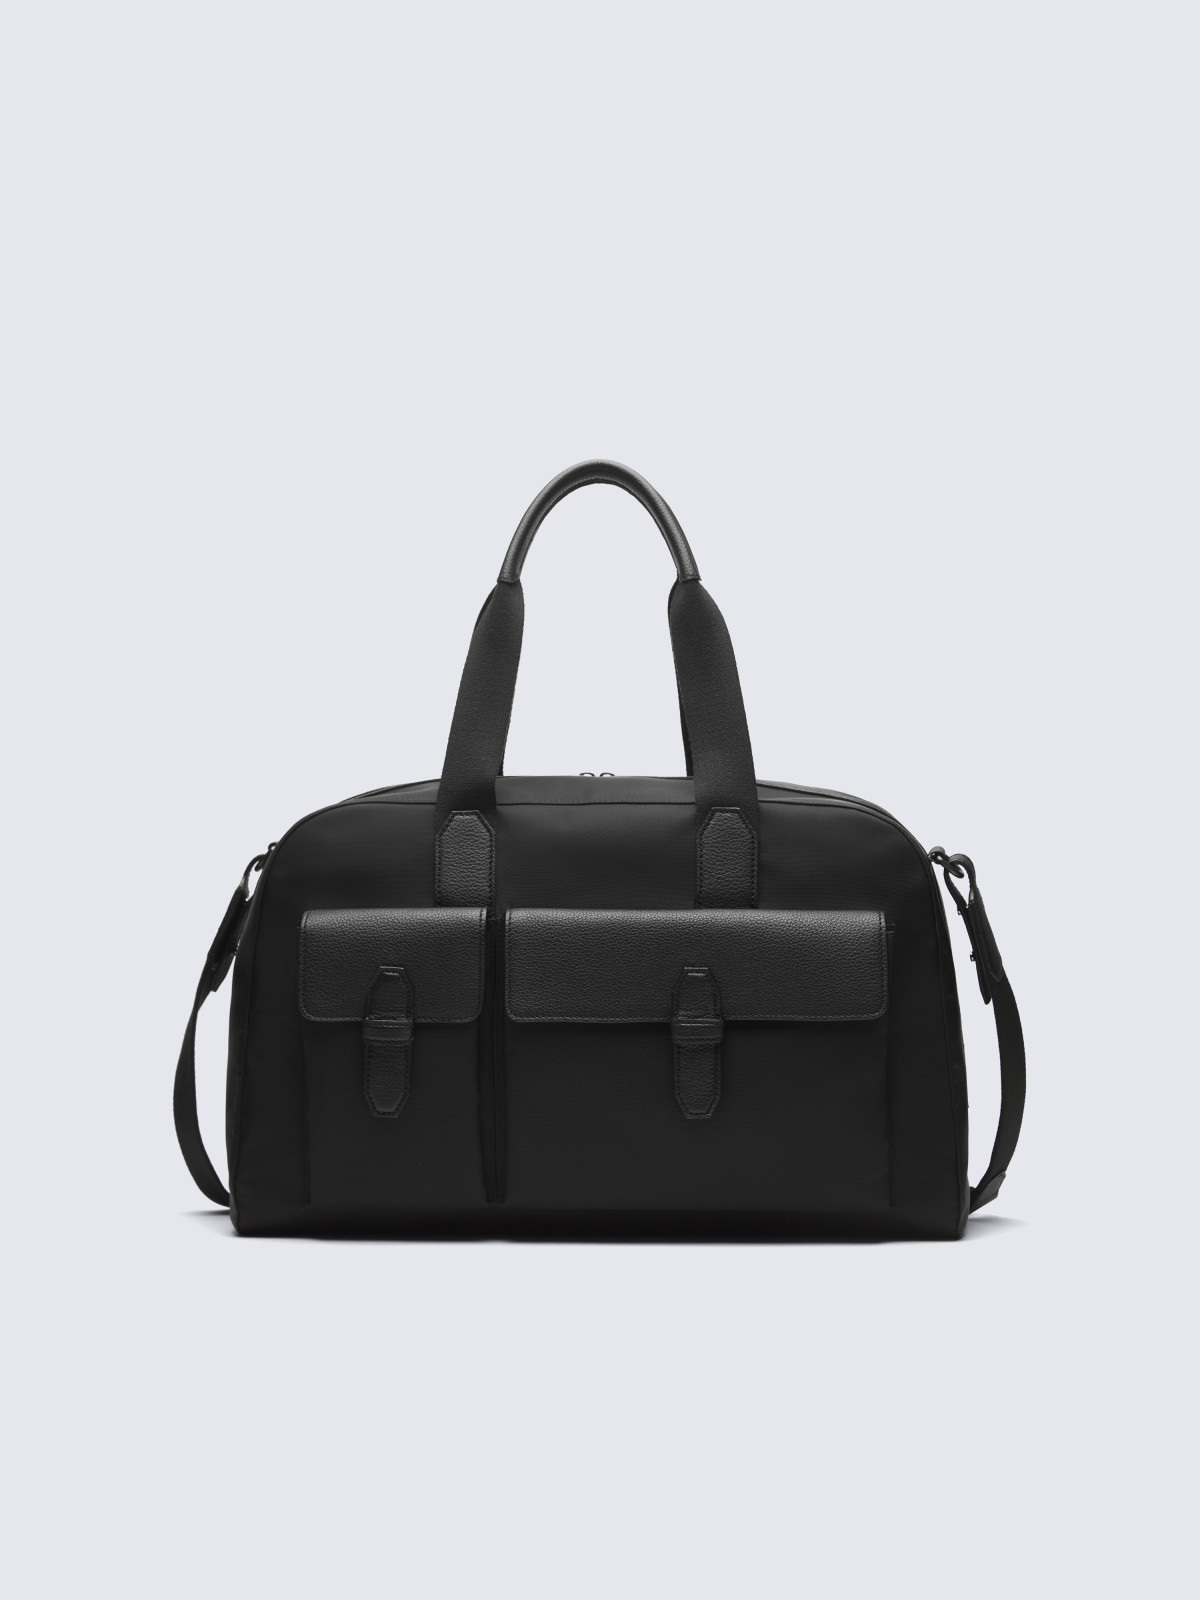 Black nylon and grained leather travel tote | Brioni® GB Official Store